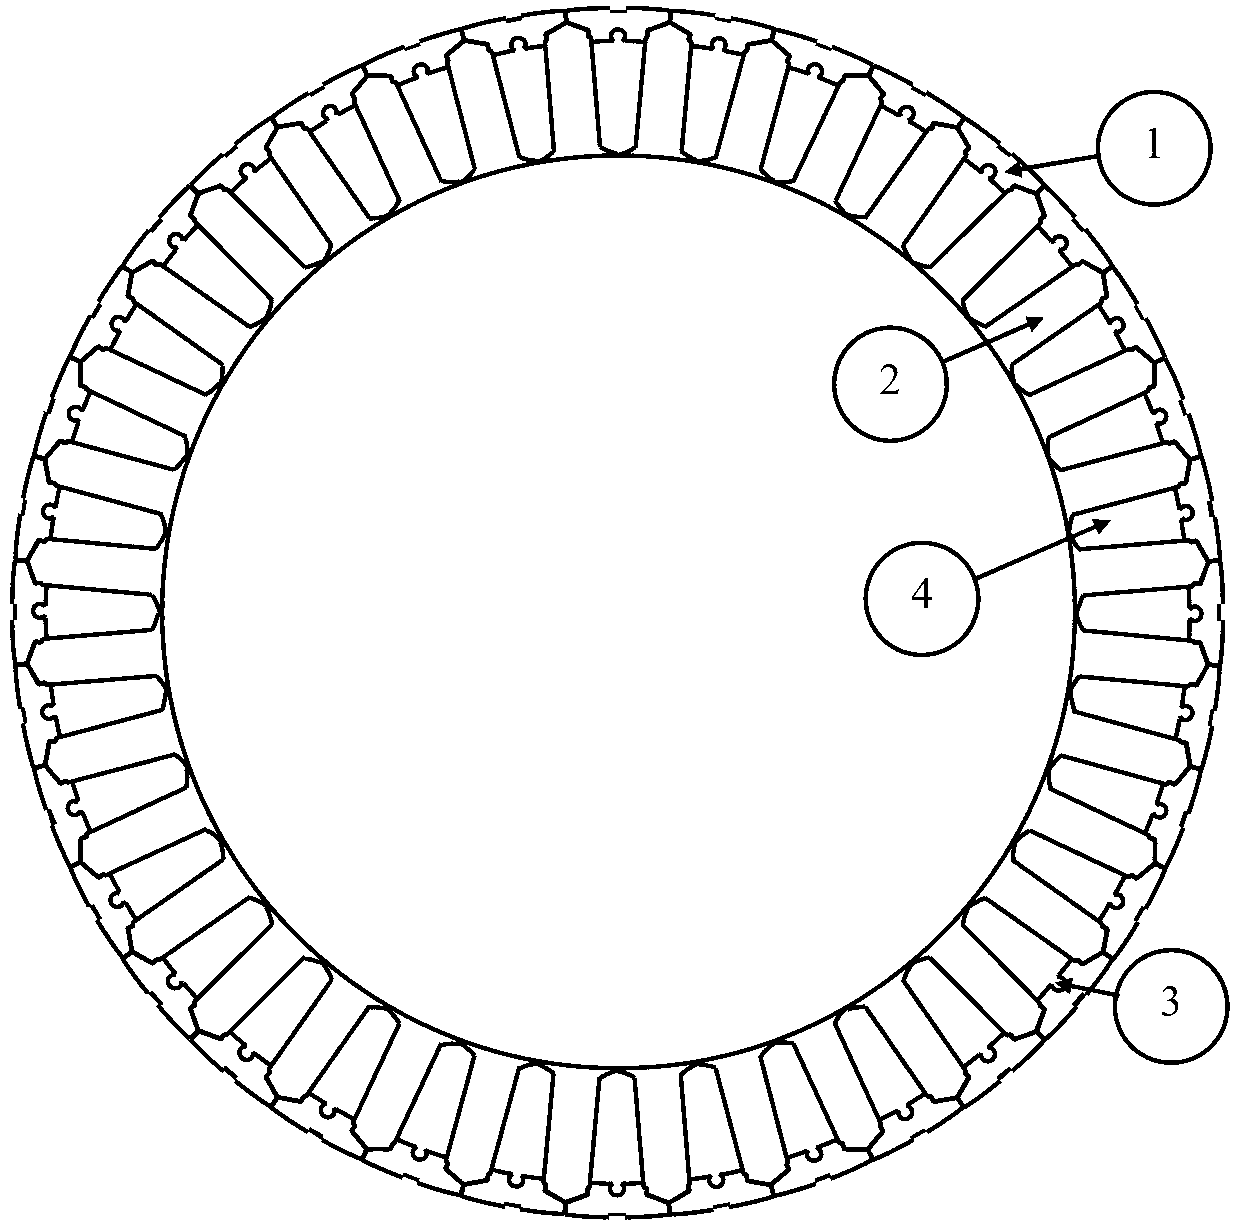 Structure of motor stator core and cooling method for motor stator based on structure of motor stator core